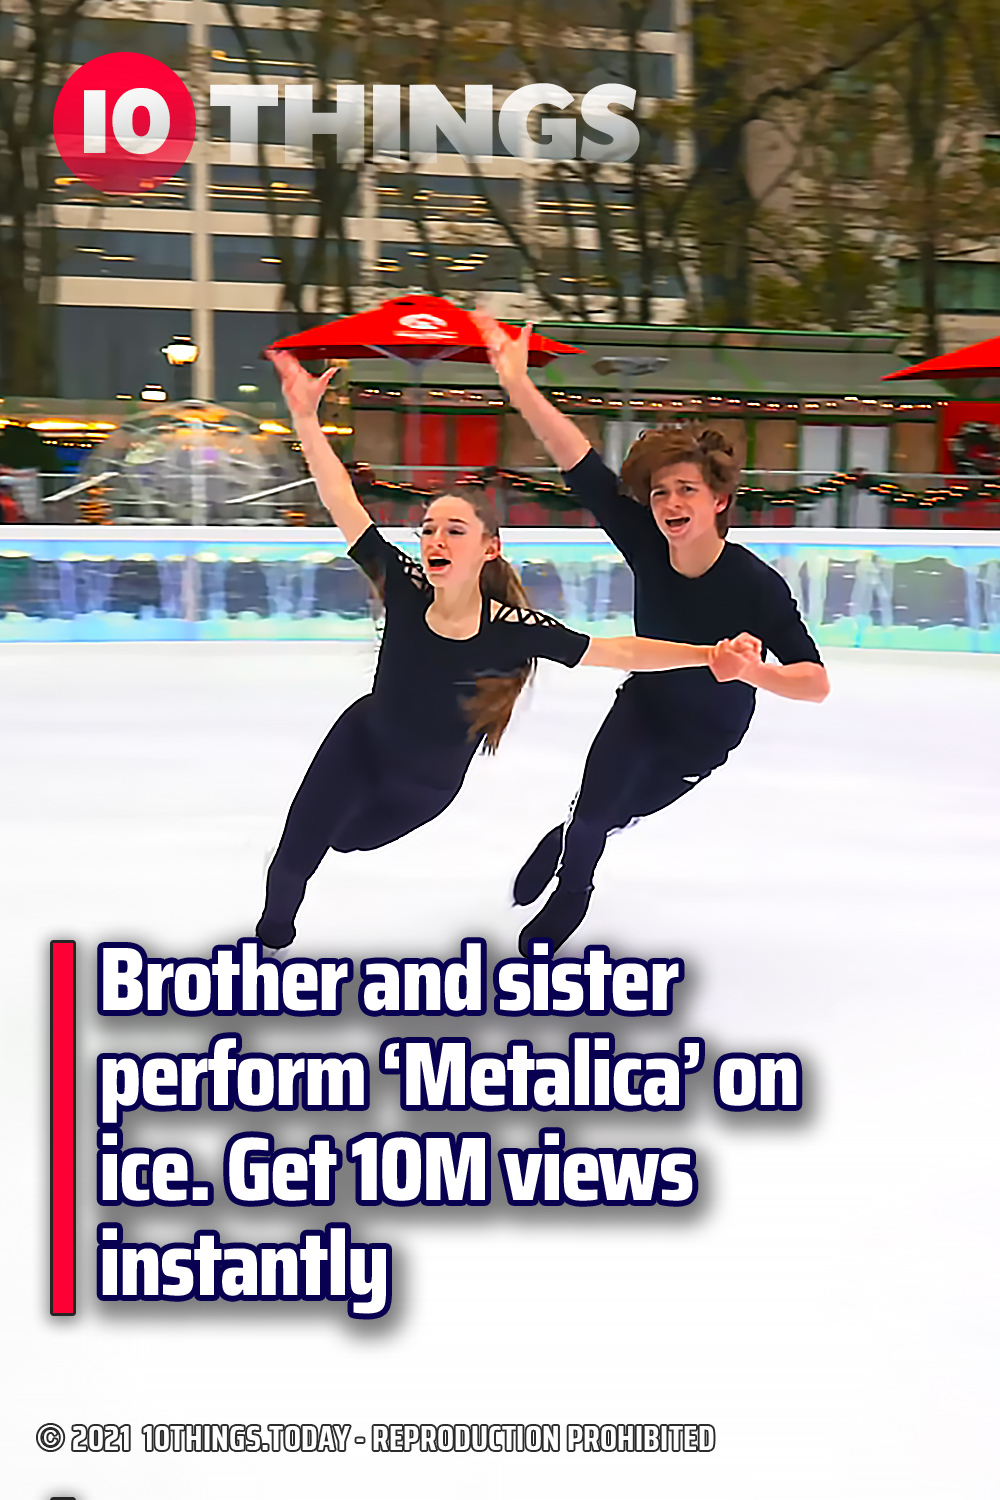 Brother and sister perform ‘Metalica’ on ice. Get 10M views instantly